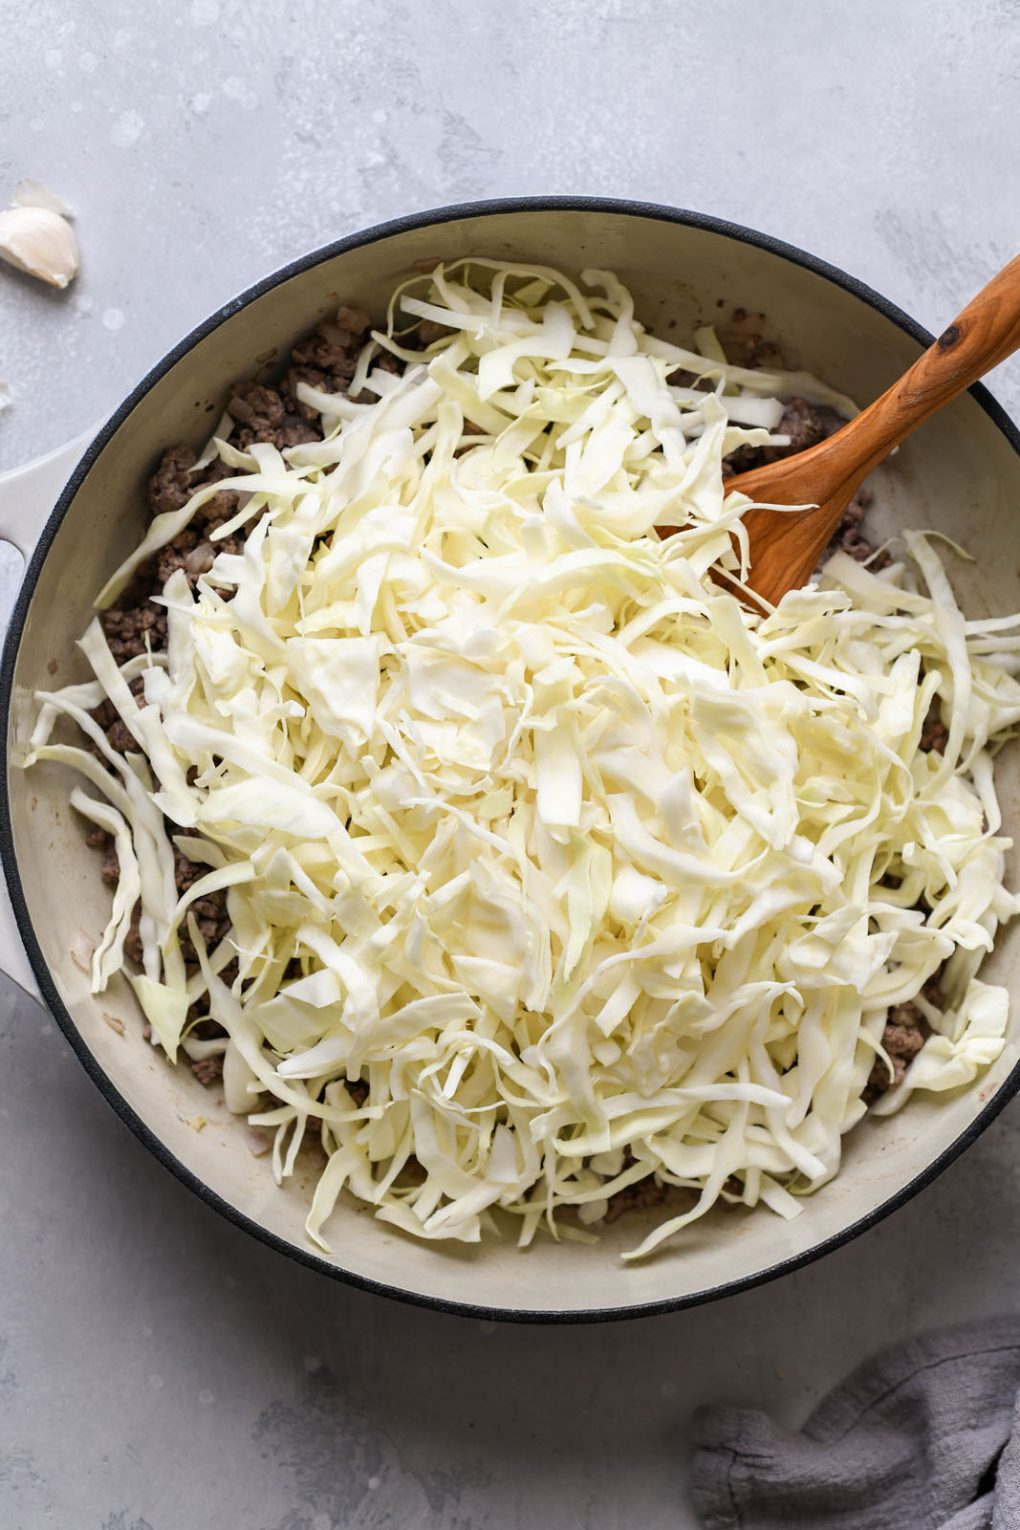 Overhead shot of a cream colored ceramic skillet filled with cooked ground beef, shallots, garlic, and piled high with fresh shredded green cabbage.